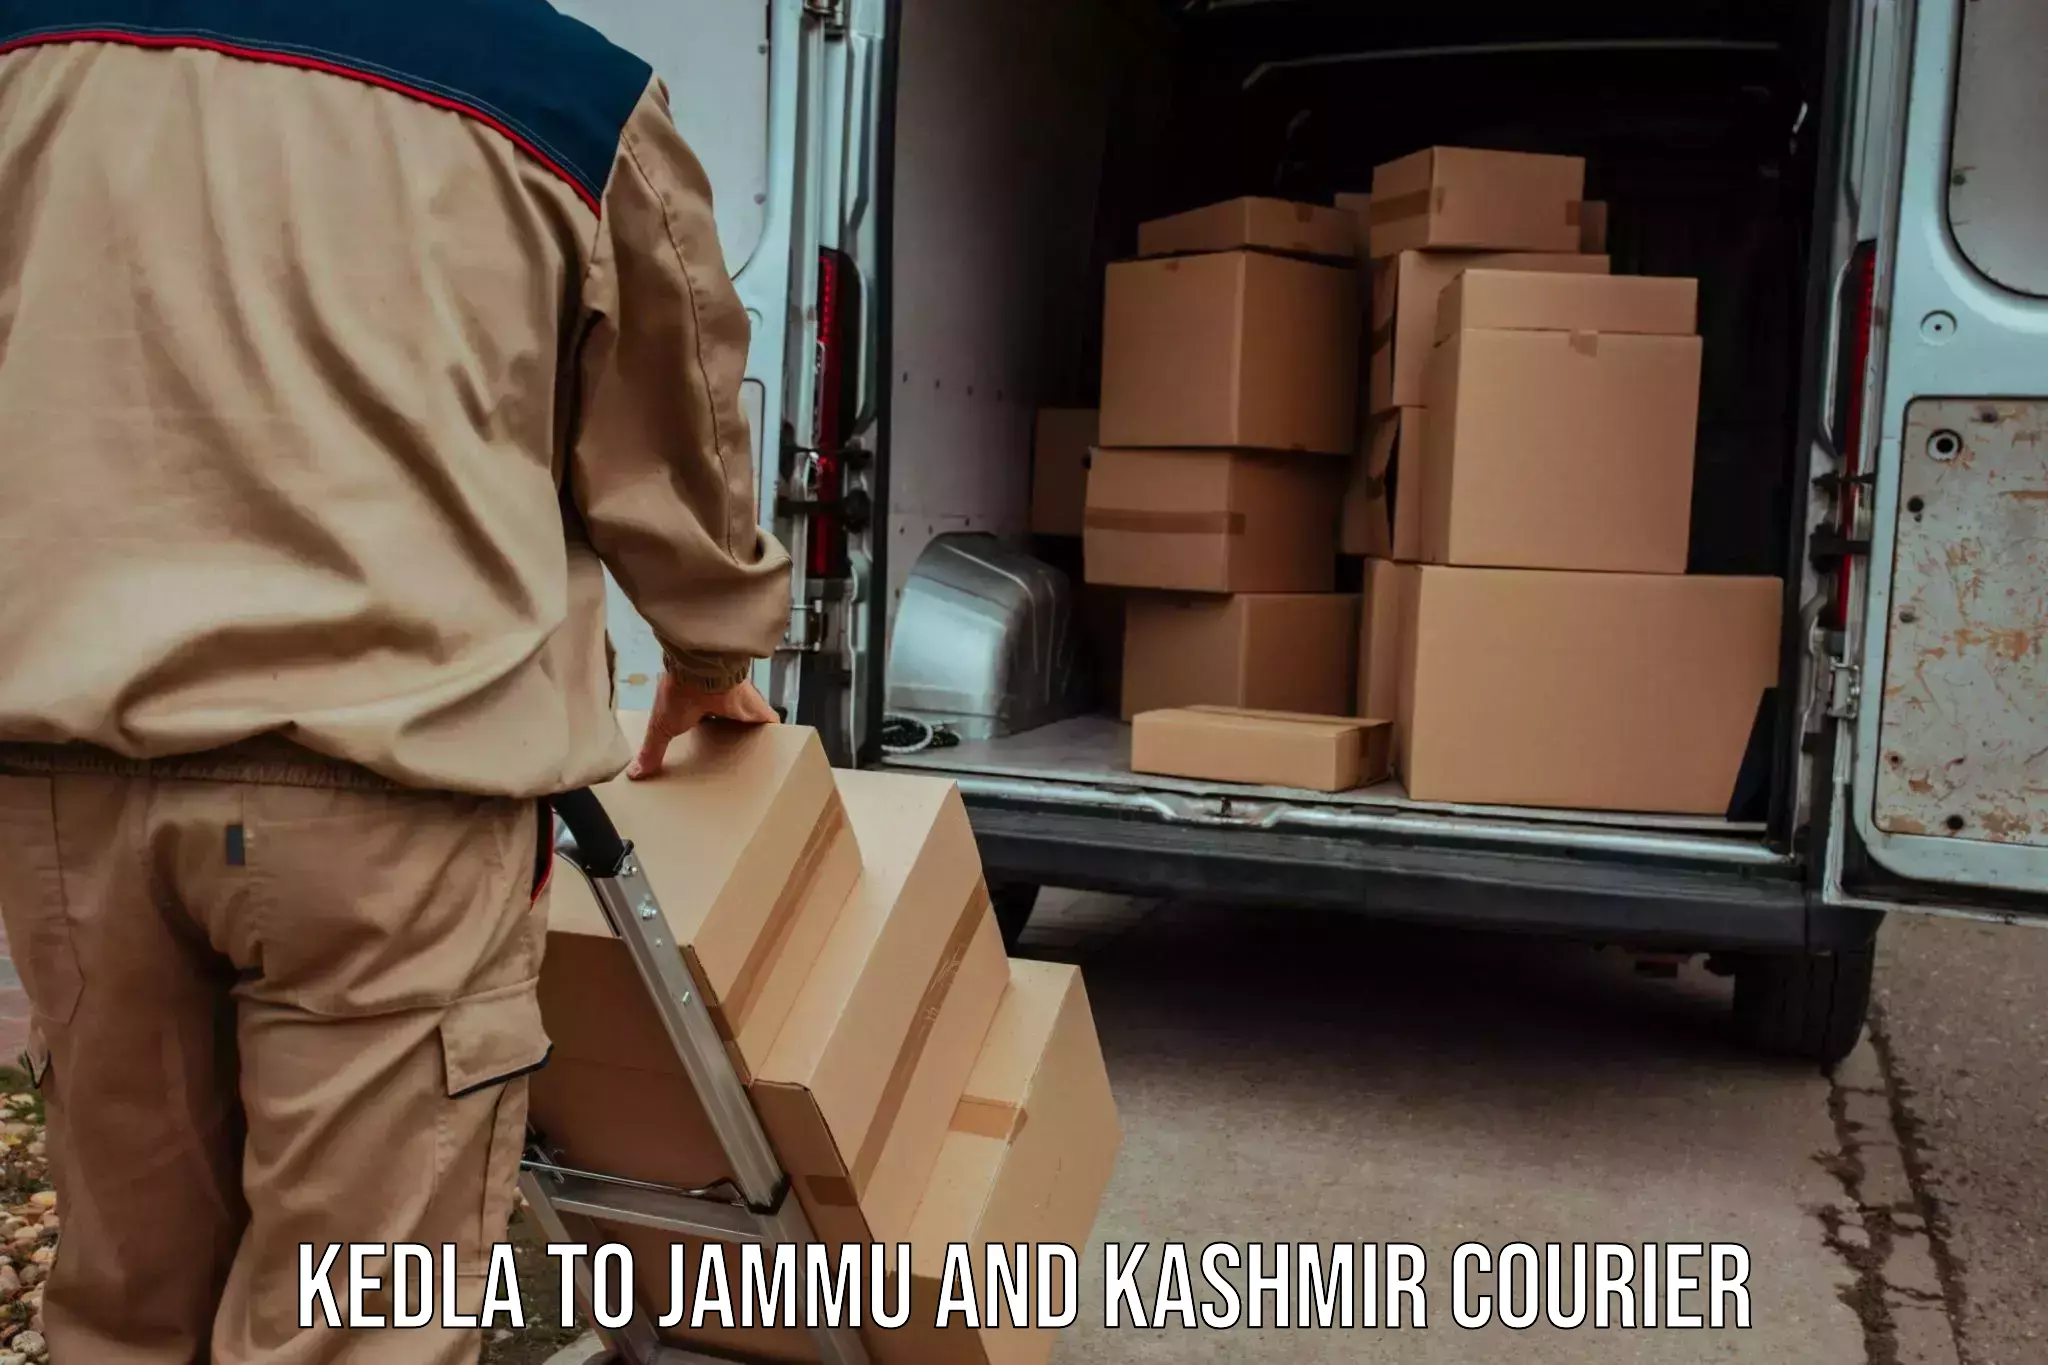 Small business couriers Kedla to Jammu and Kashmir